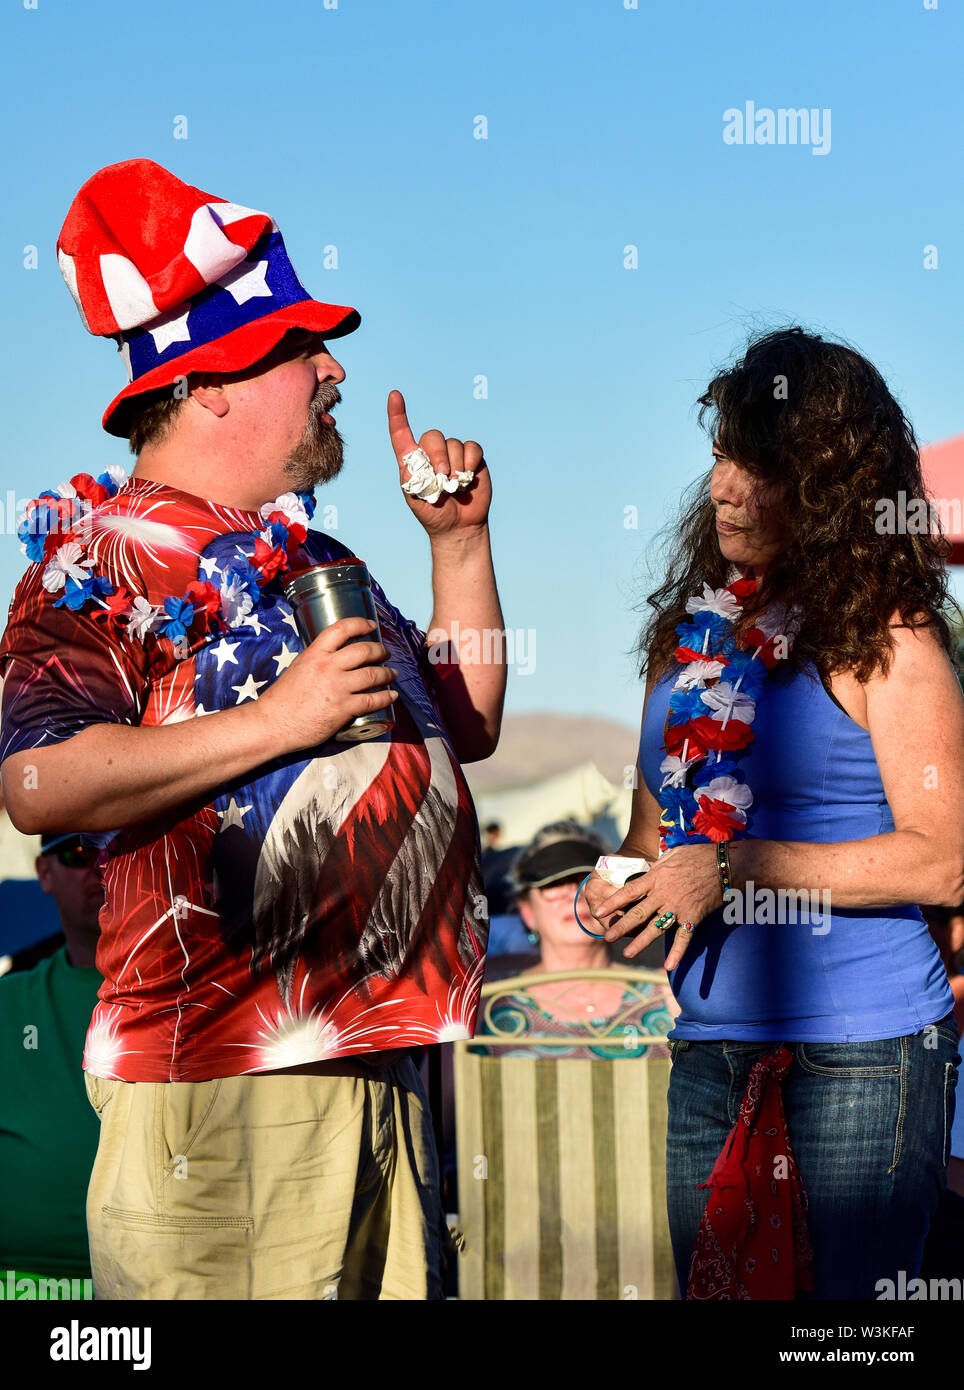 American Independence Day Festive People, Stock Photo